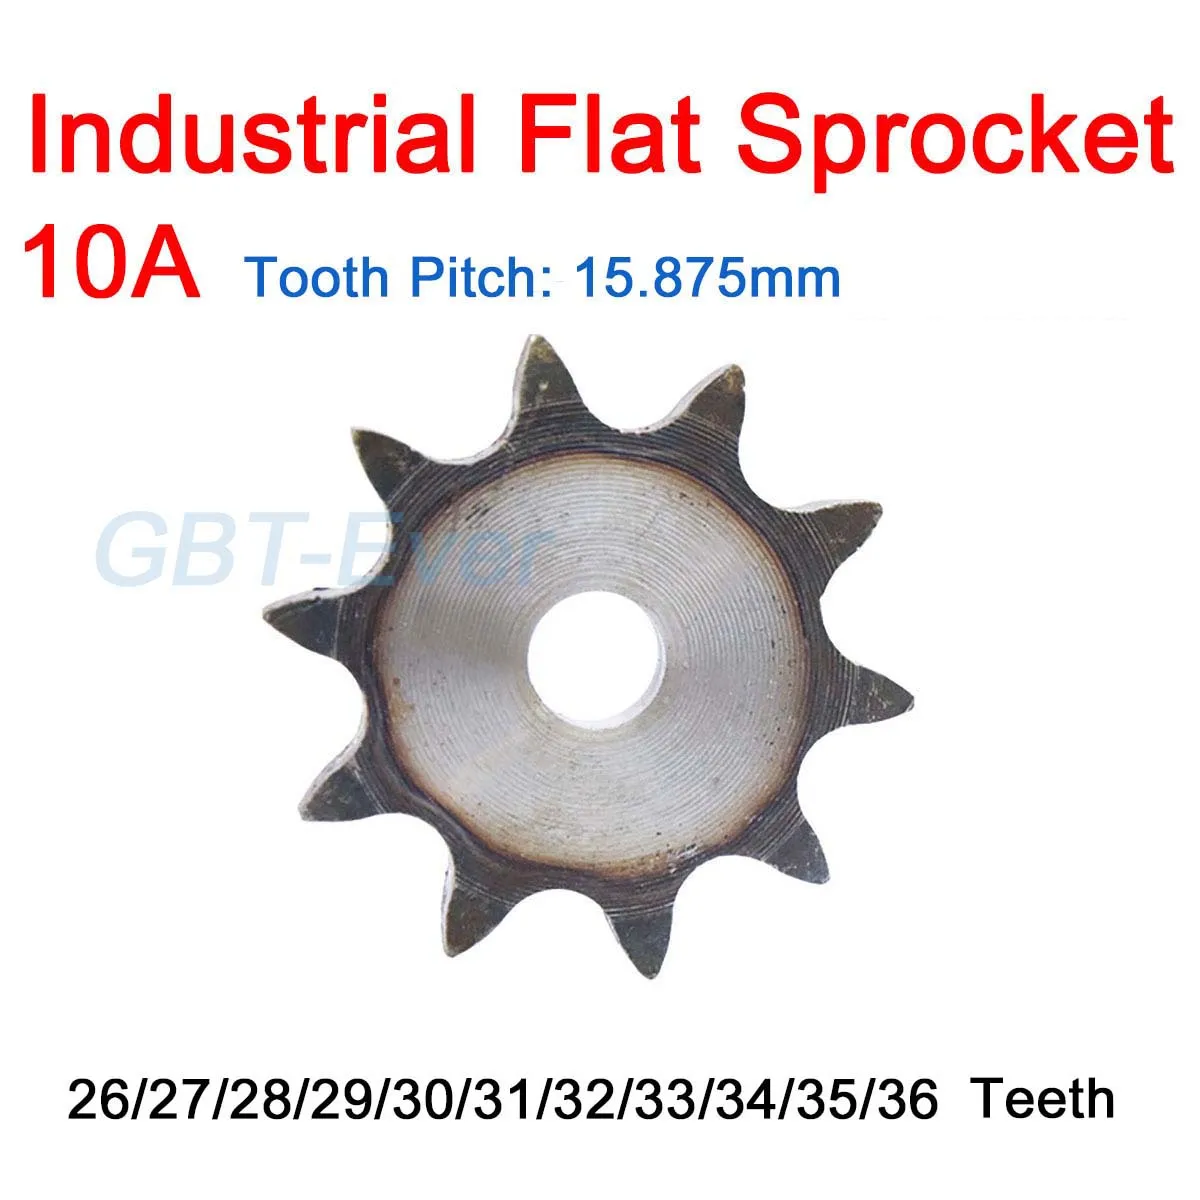 

1Pcs 10A 26-36 Teeth Chain Drive Flat Sprocket Carbon Steel Roller Chain Gear Tooth Pitch 15.875mm Industrial Sprocket Wheel